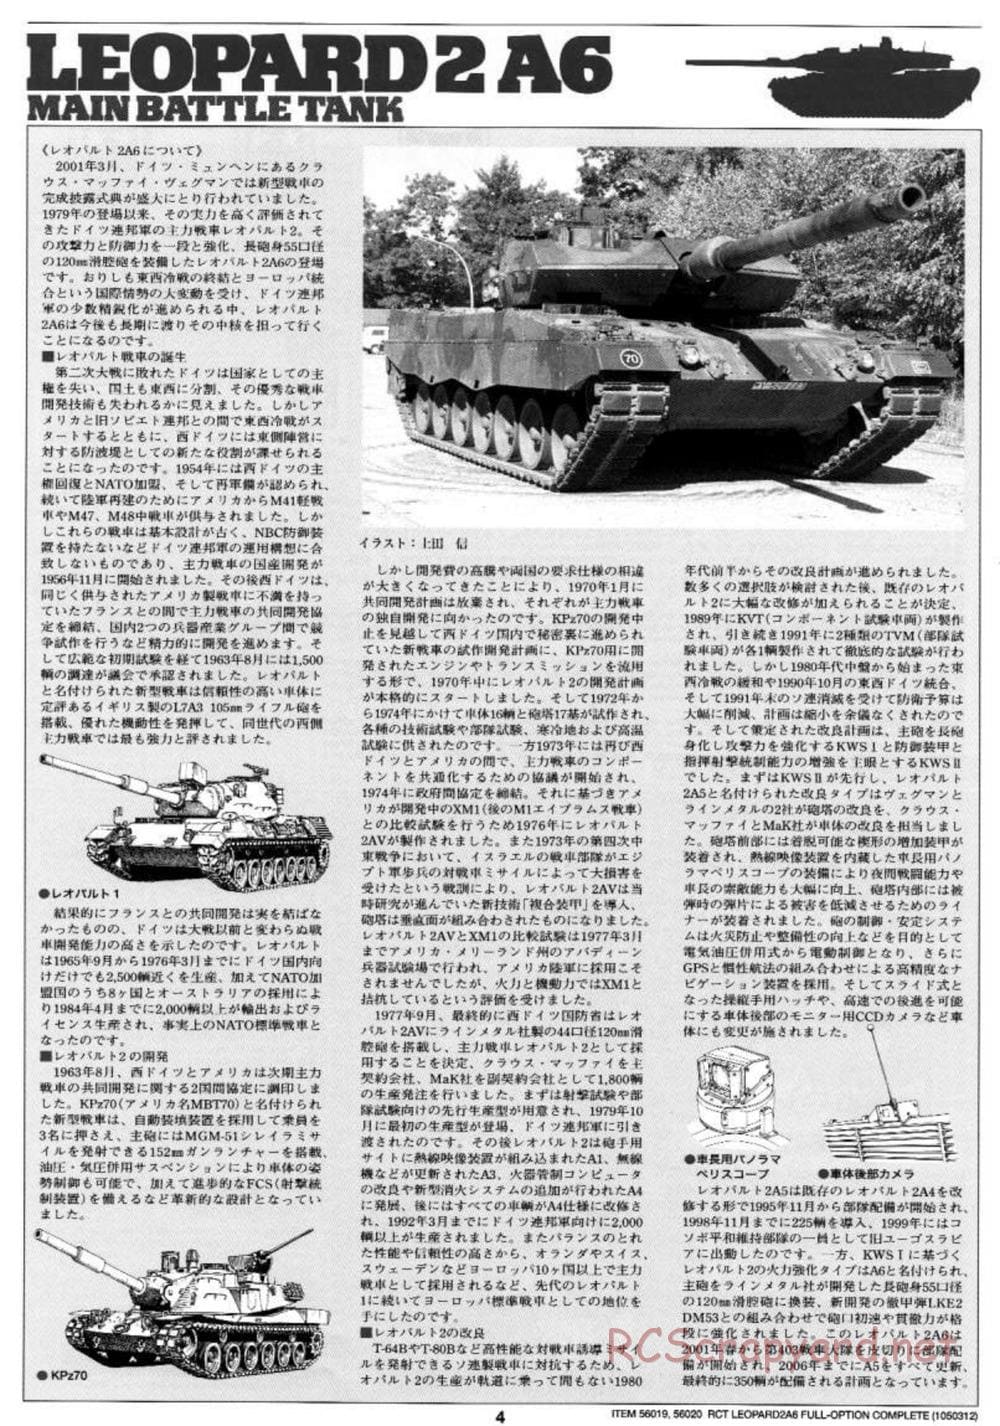 Tamiya - Leopard 2 A6 - 1/16 Scale Chassis - Manual - Page 4